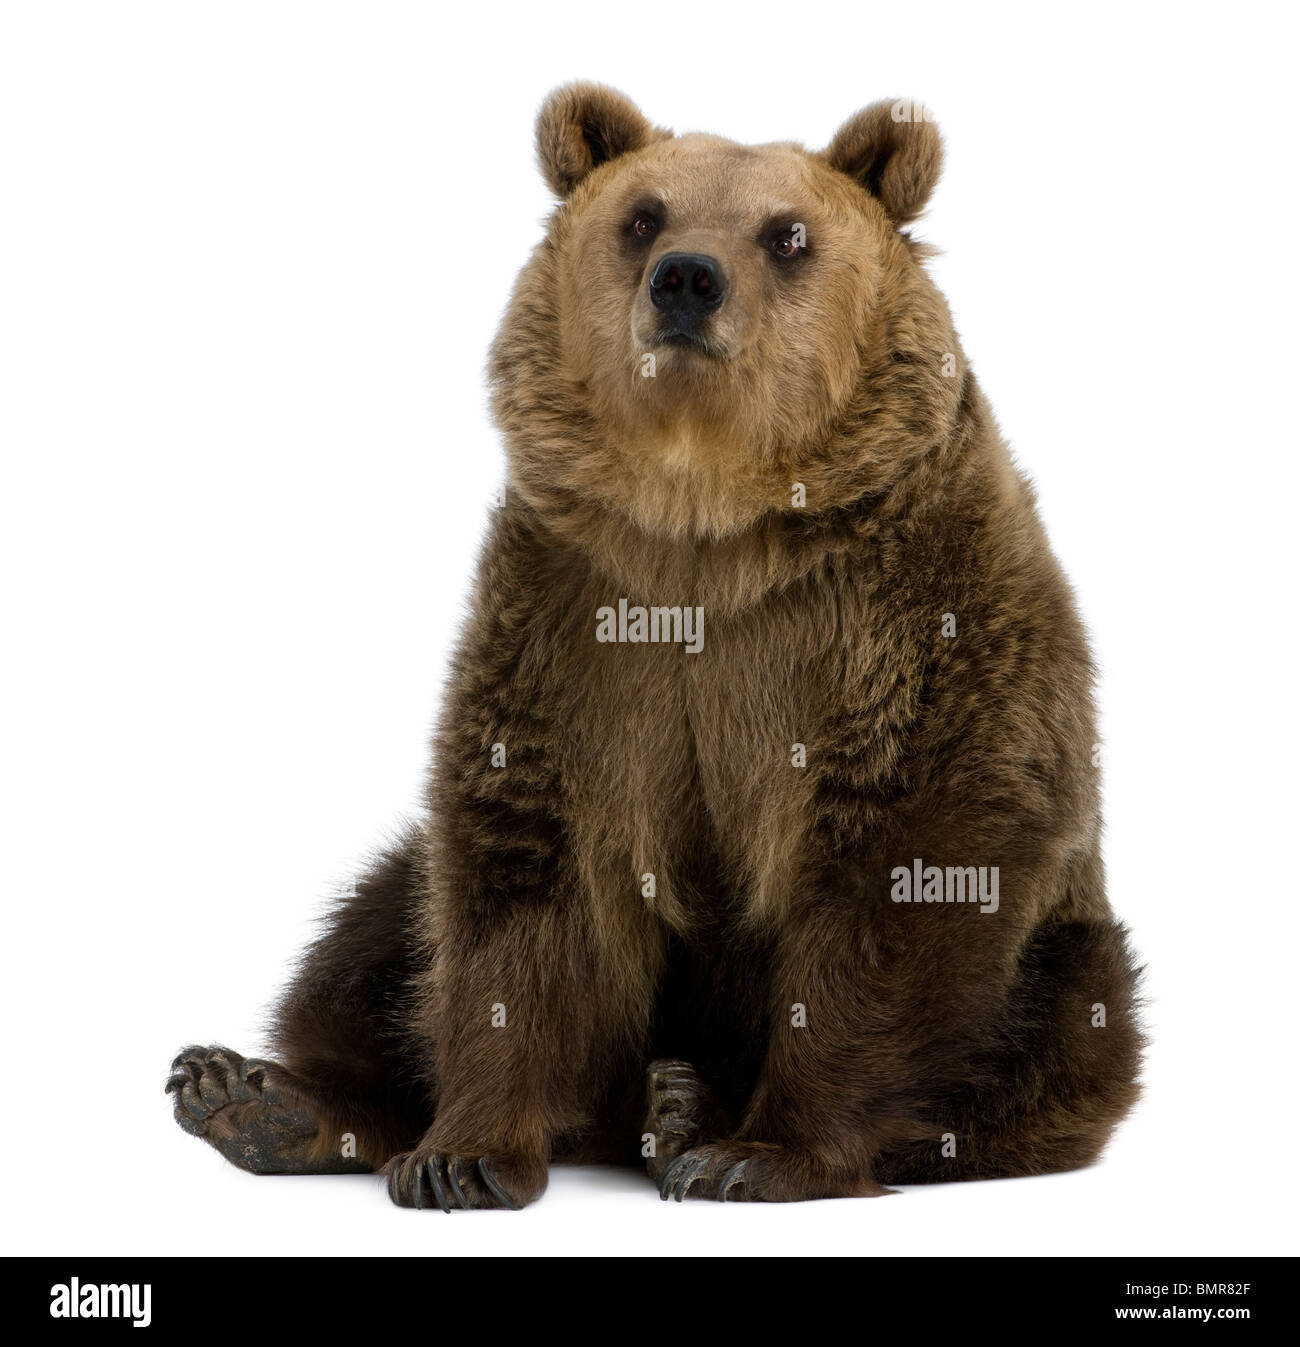 Female Brown Bear, 8 years old, sitting against white background Stock Photo